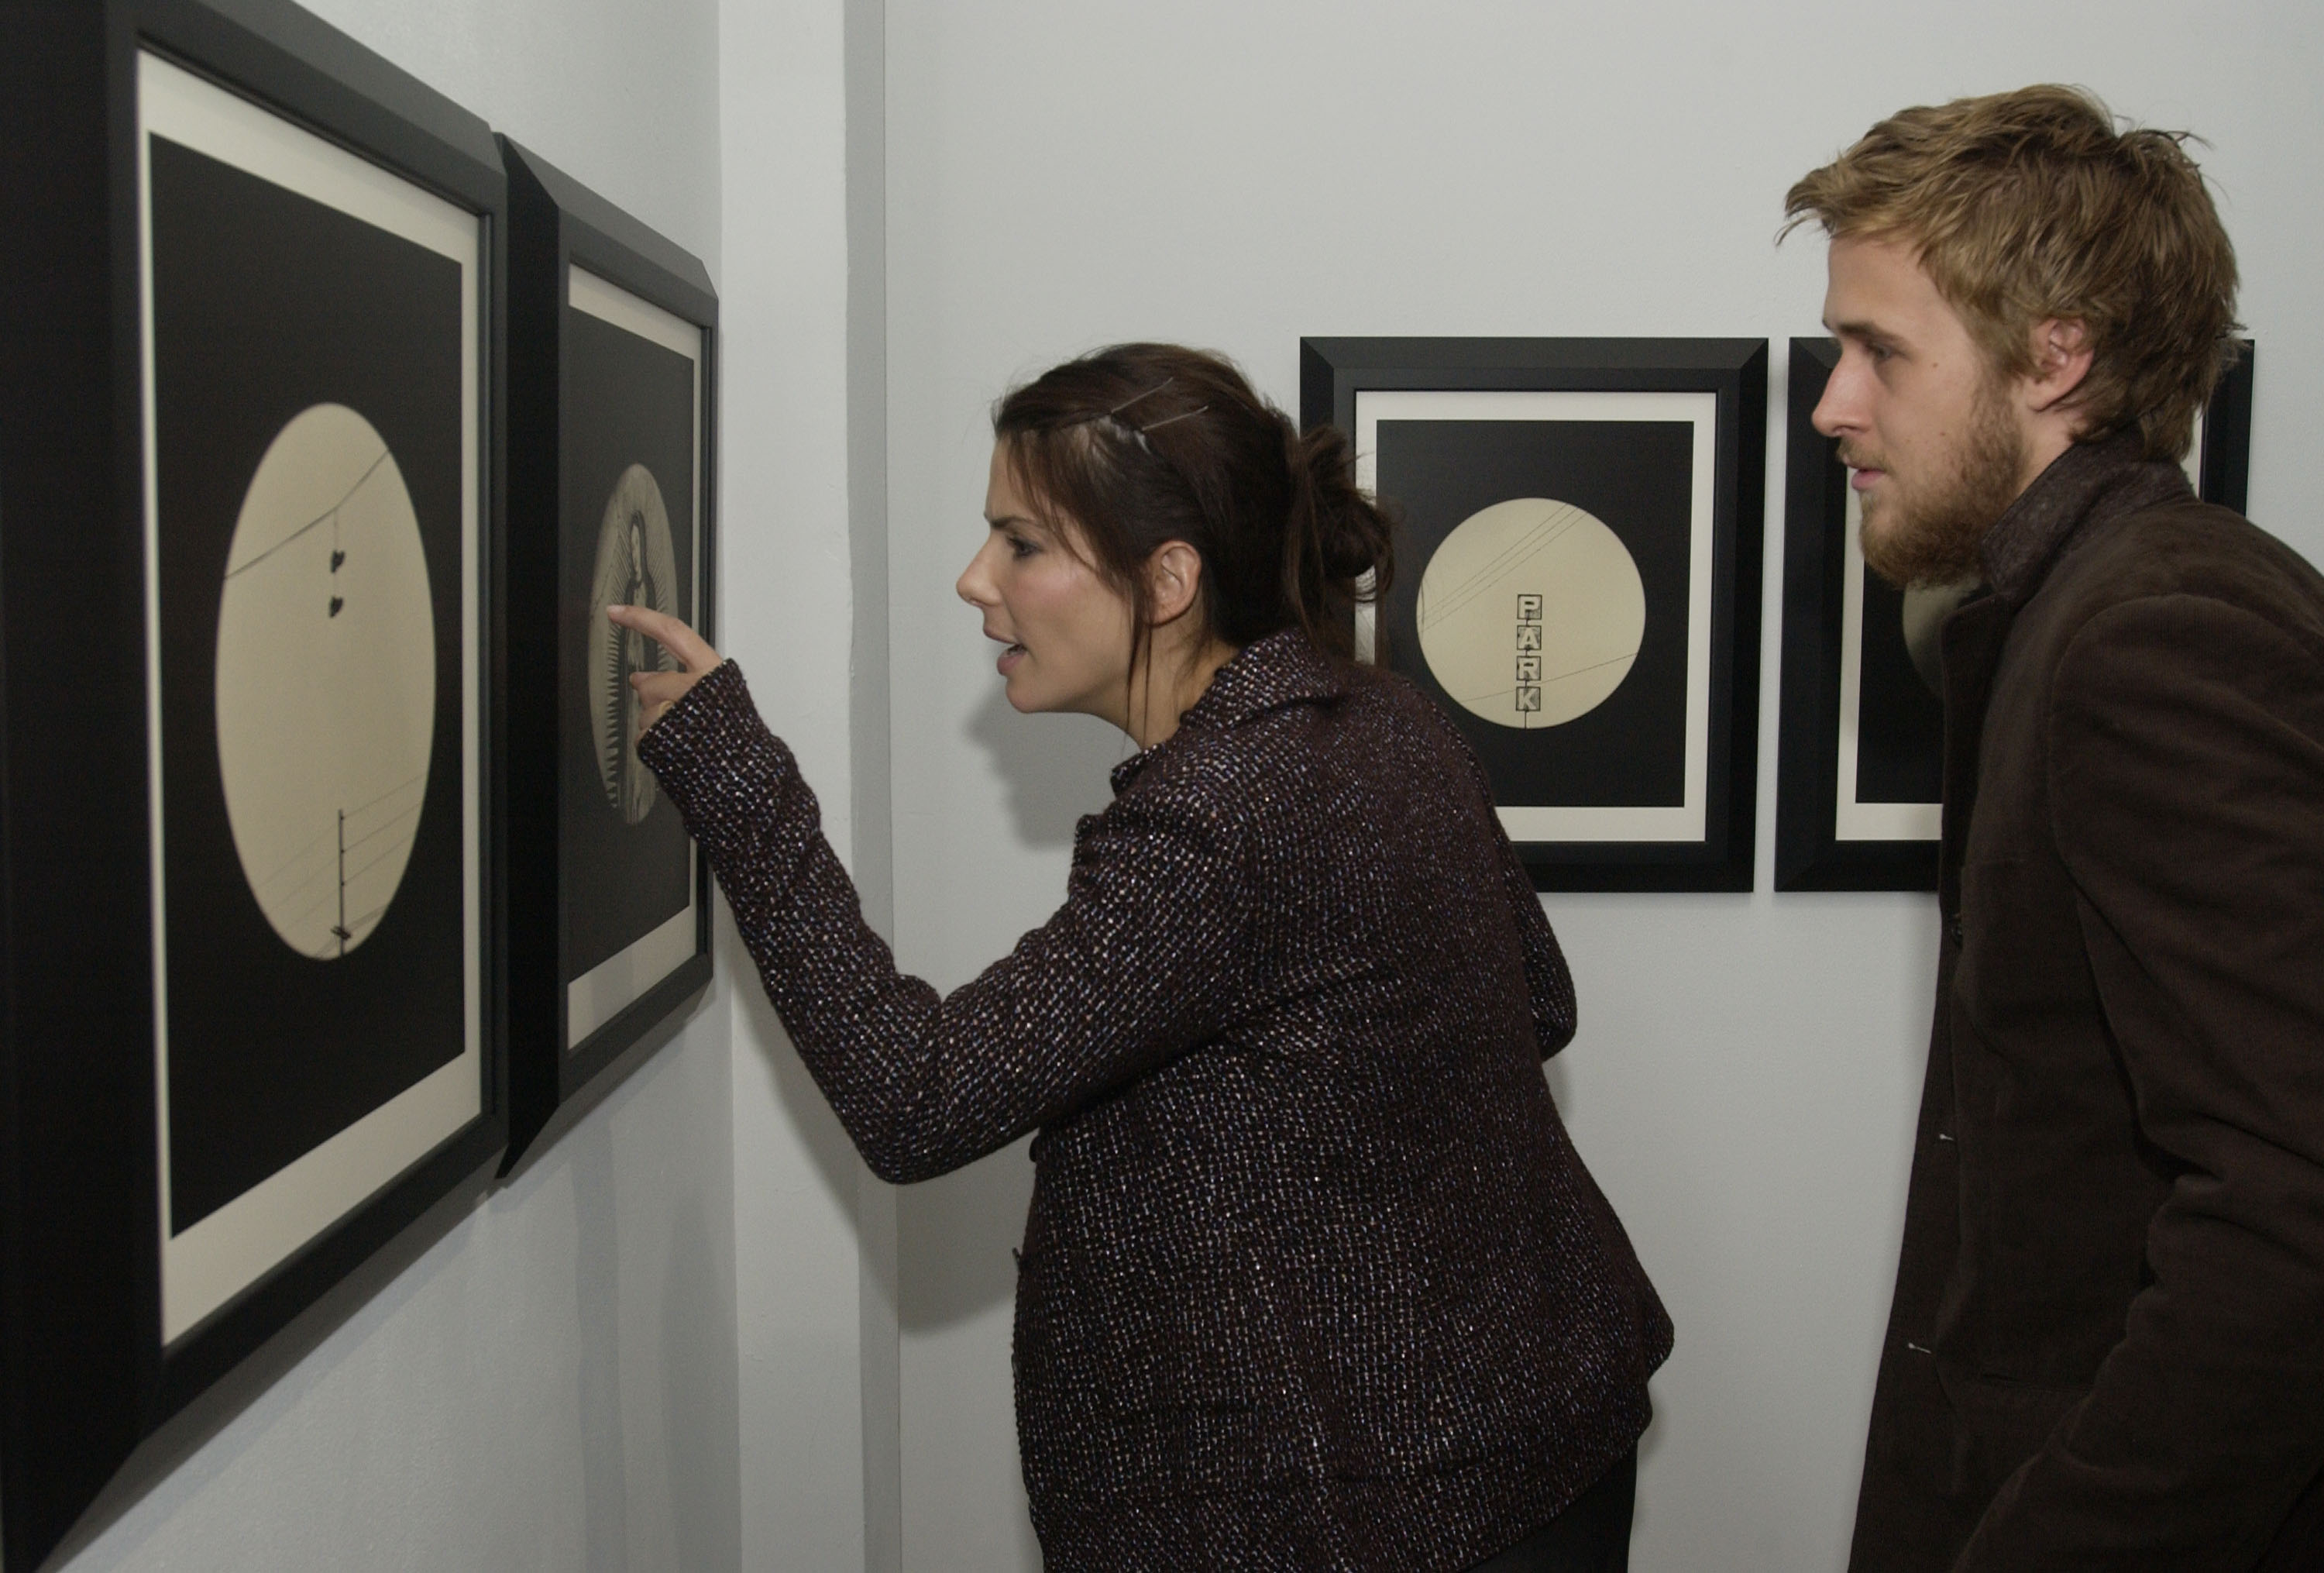 Sandra Bullock and Ryan Gosling at the artist's reception for photographer Dan Winters' gallery showing entitled "La Ciudad," on September 14, 2002, in Los Angeles | Source: Getty Images